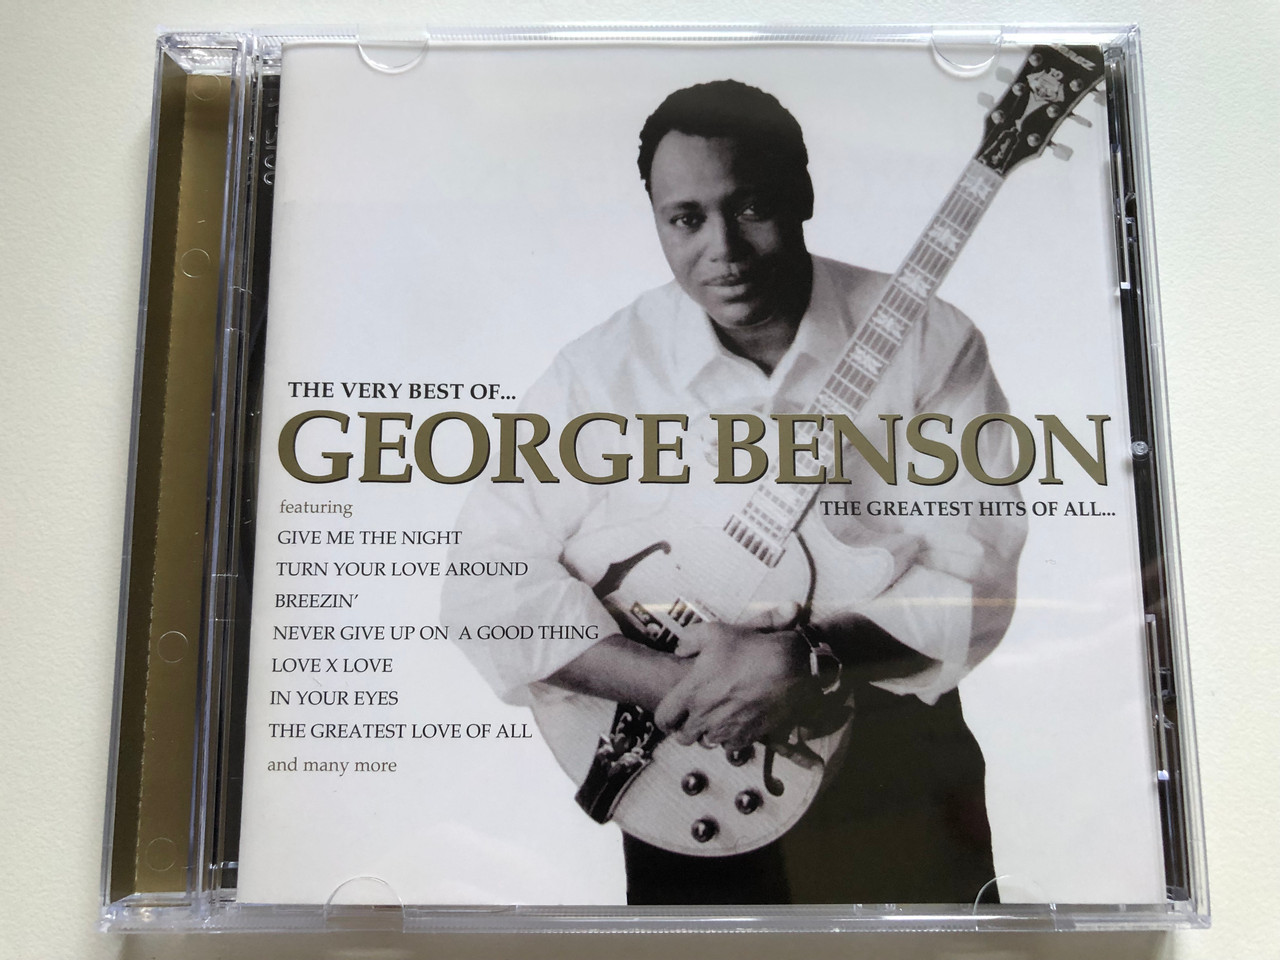 https://cdn10.bigcommerce.com/s-62bdpkt7pb/products/0/images/236088/The_Very_Best_Of..._George_Benson_-_The_Greatest_Hits_Of_All..._Featuring_Give_Me_The_Night_Turn_Your_Love_Around_Breezin_Never_Give_Up_On_A_Good_Thing_Love_X_Love_In_Your_Eyes_Warner_1__15091.1656417091.1280.1280.JPG?c=2&_gl=1*ntegbi*_ga*MjA2NTIxMjE2MC4xNTkwNTEyNTMy*_ga_WS2VZYPC6G*MTY1NjQwODYyMi40NTcuMS4xNjU2NDE2OTMyLjM5